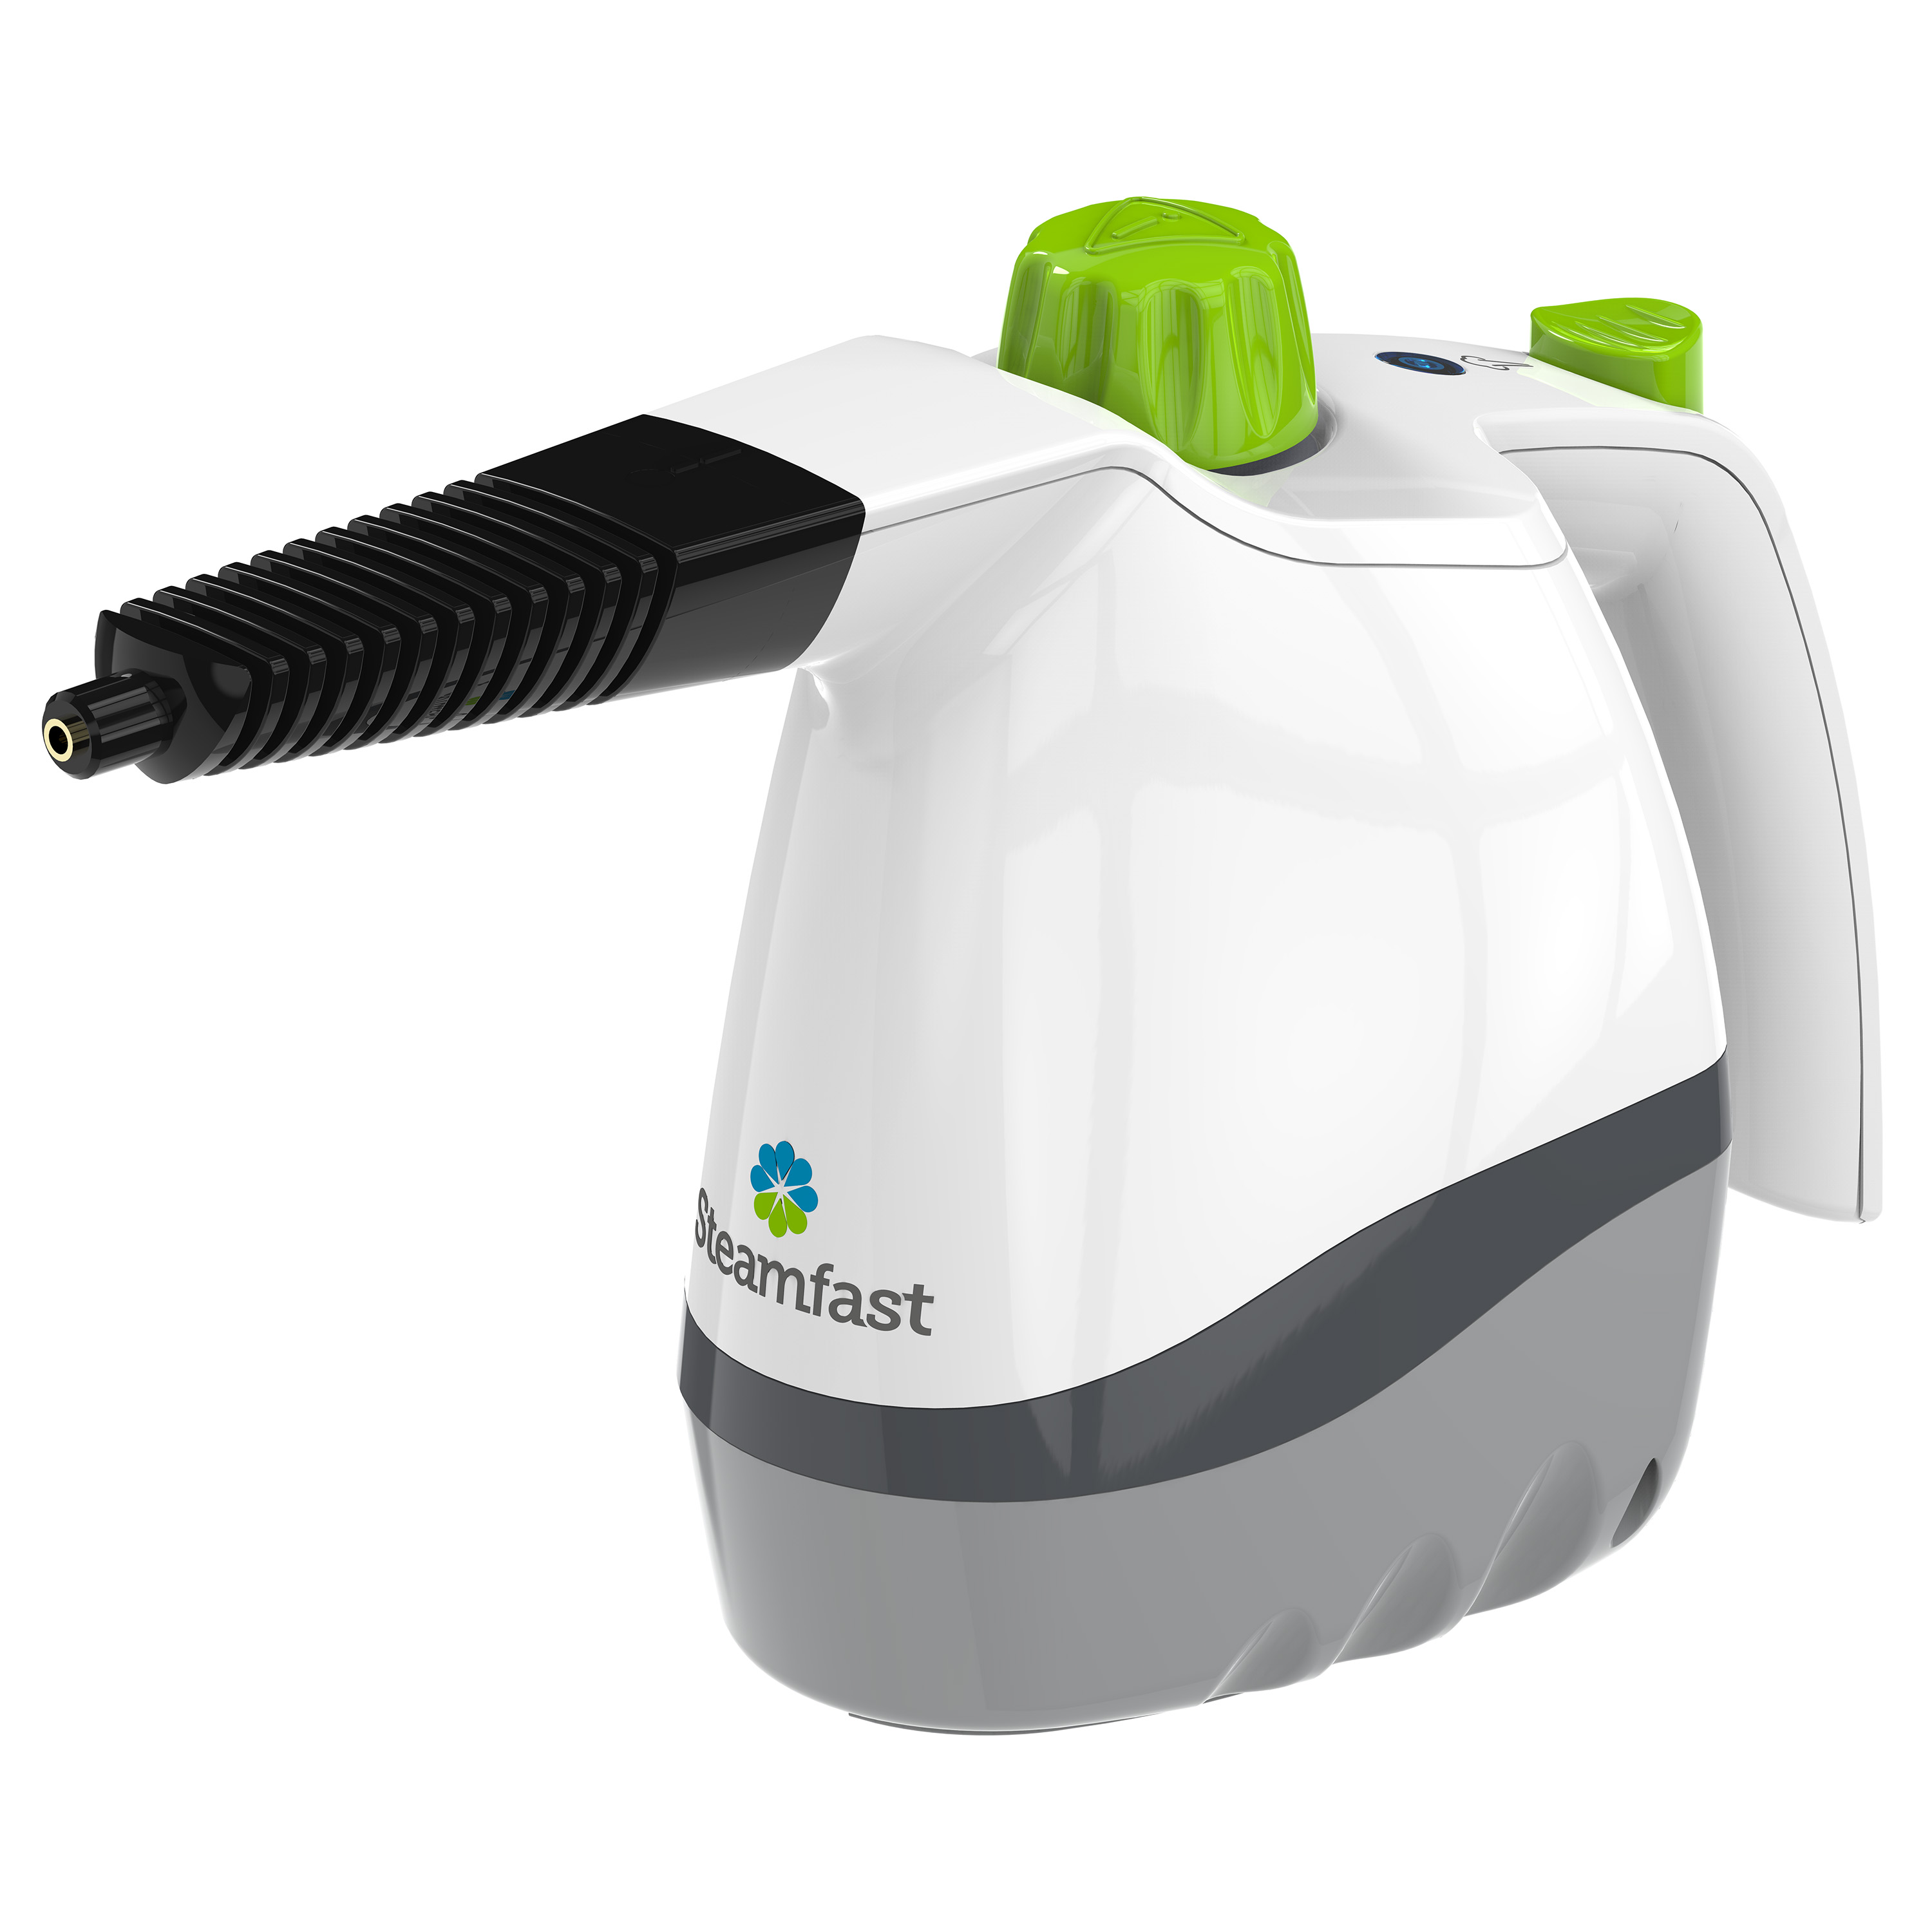 Steamfast SF-210 Handheld Steam Cleaner with 6 Accessories - image 1 of 8